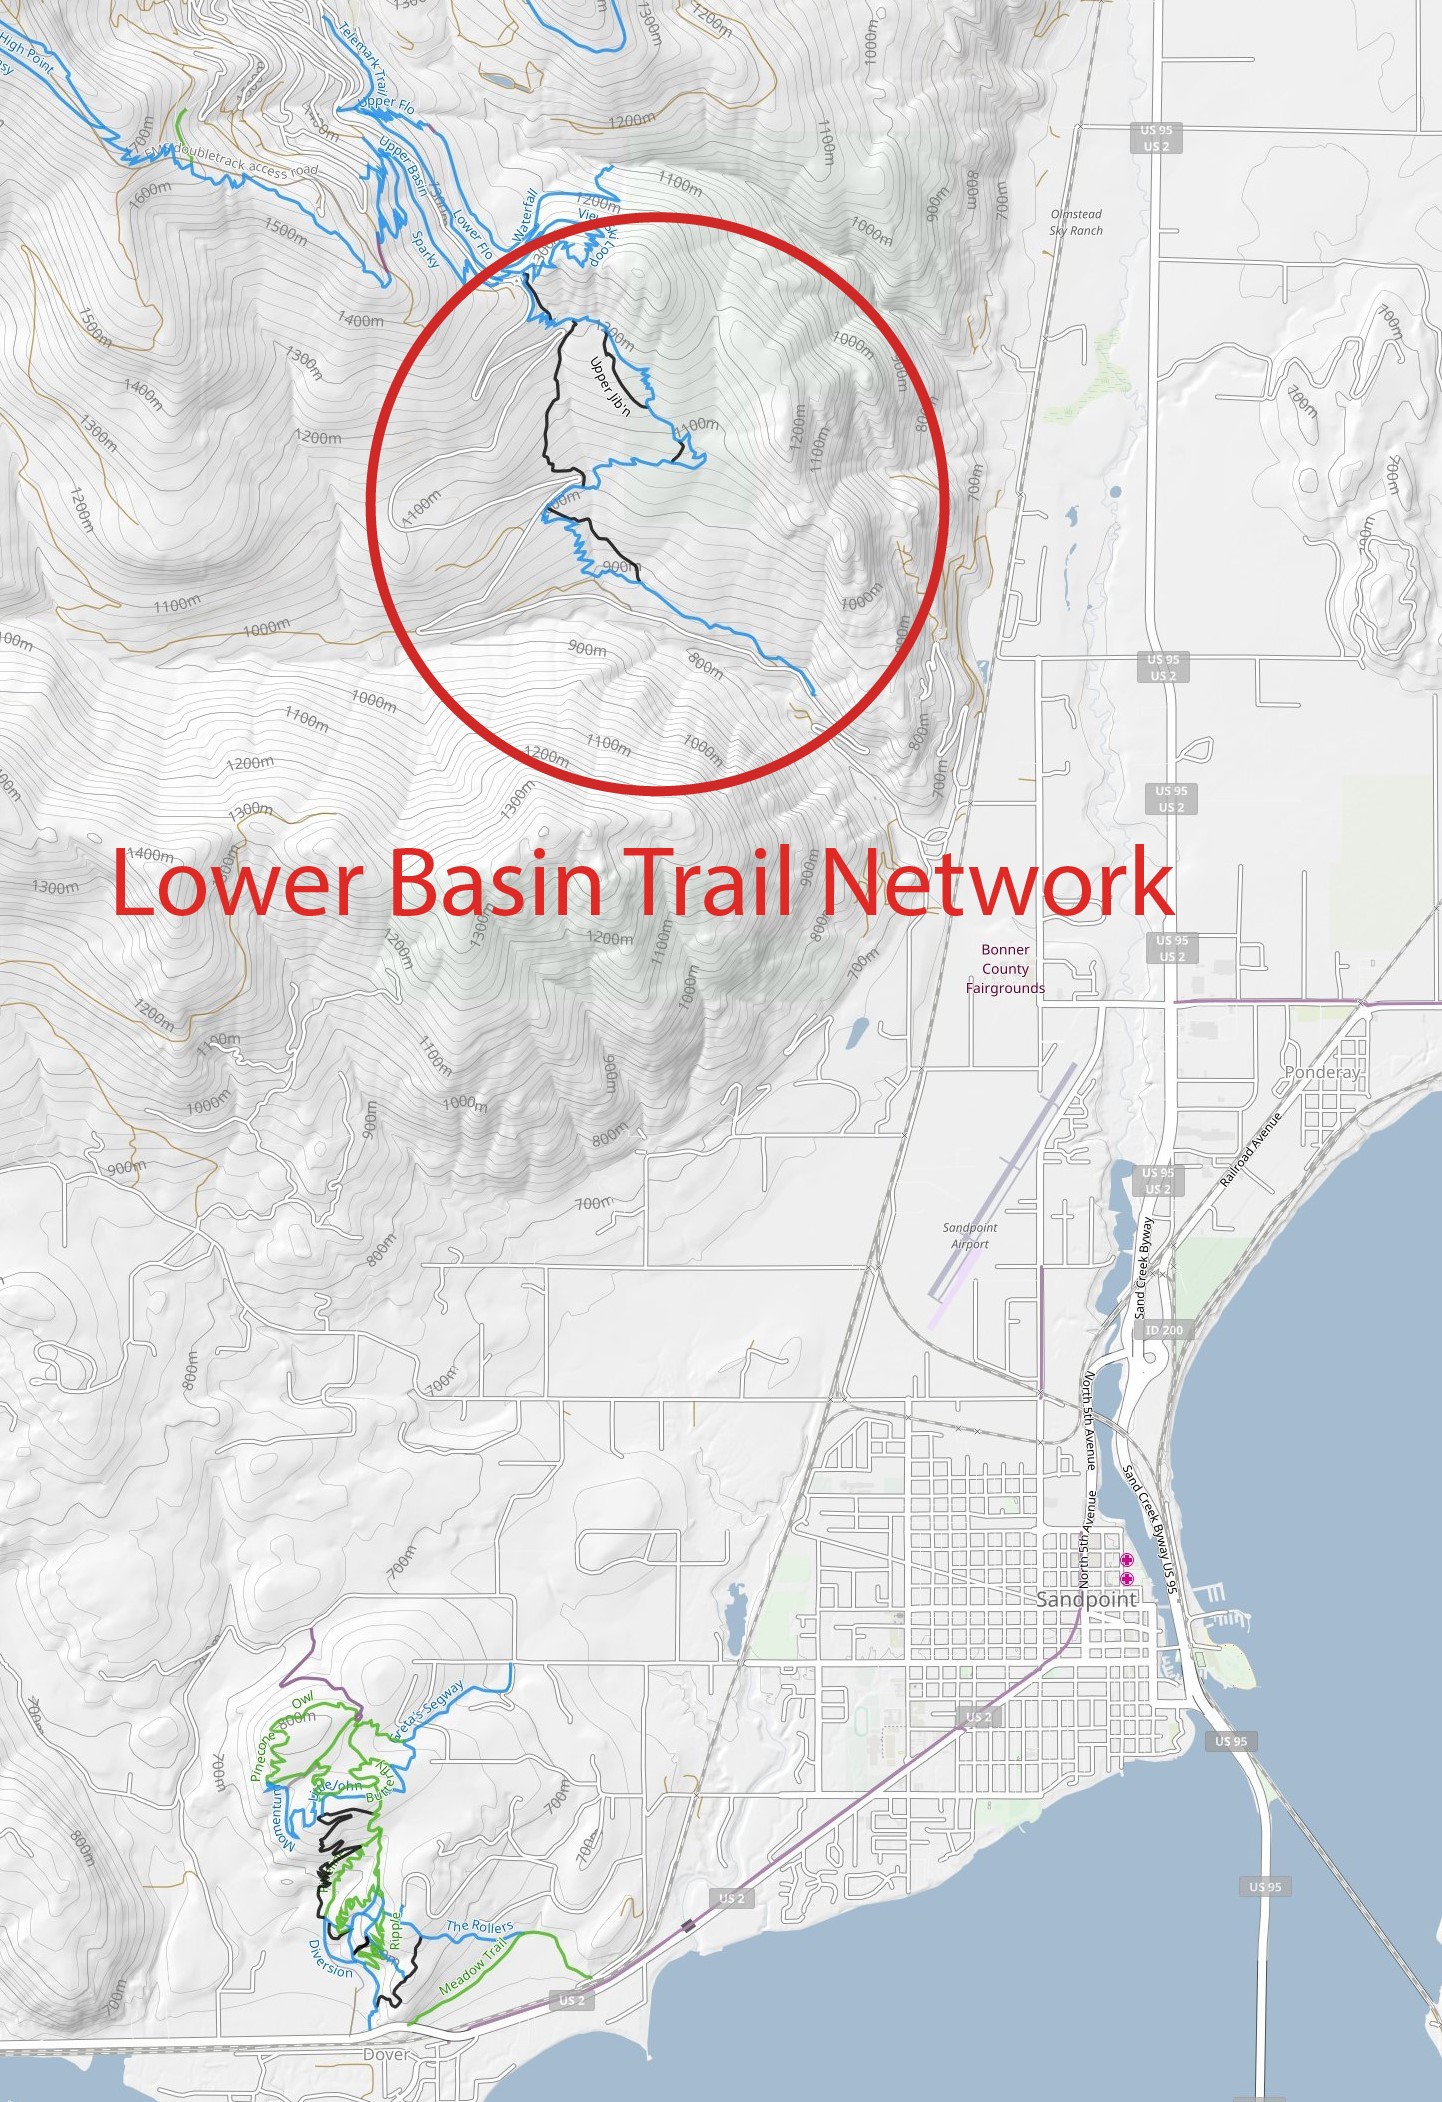 Lower Basin Trail Network lies 3 miles north of downtown Sandpoint